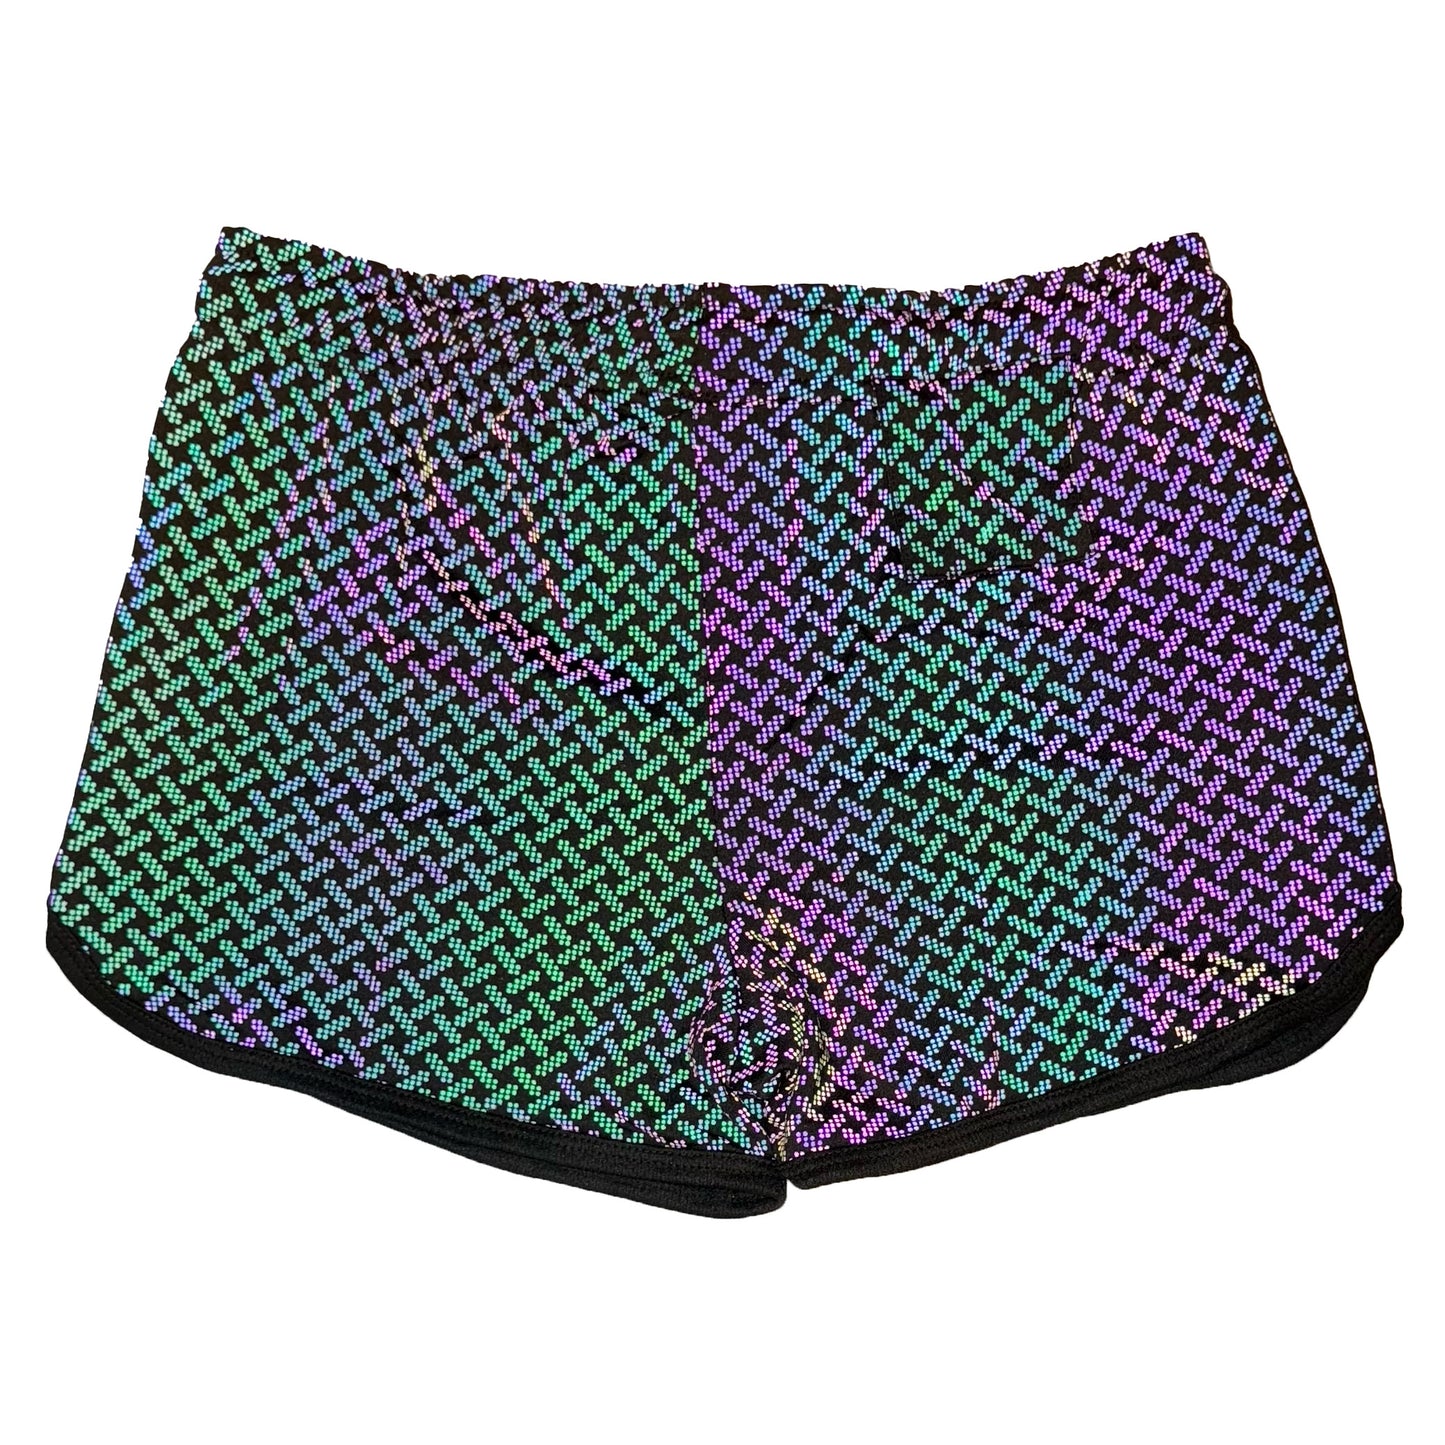 The "VPL" Party Shorts - Flash Reflective Weave